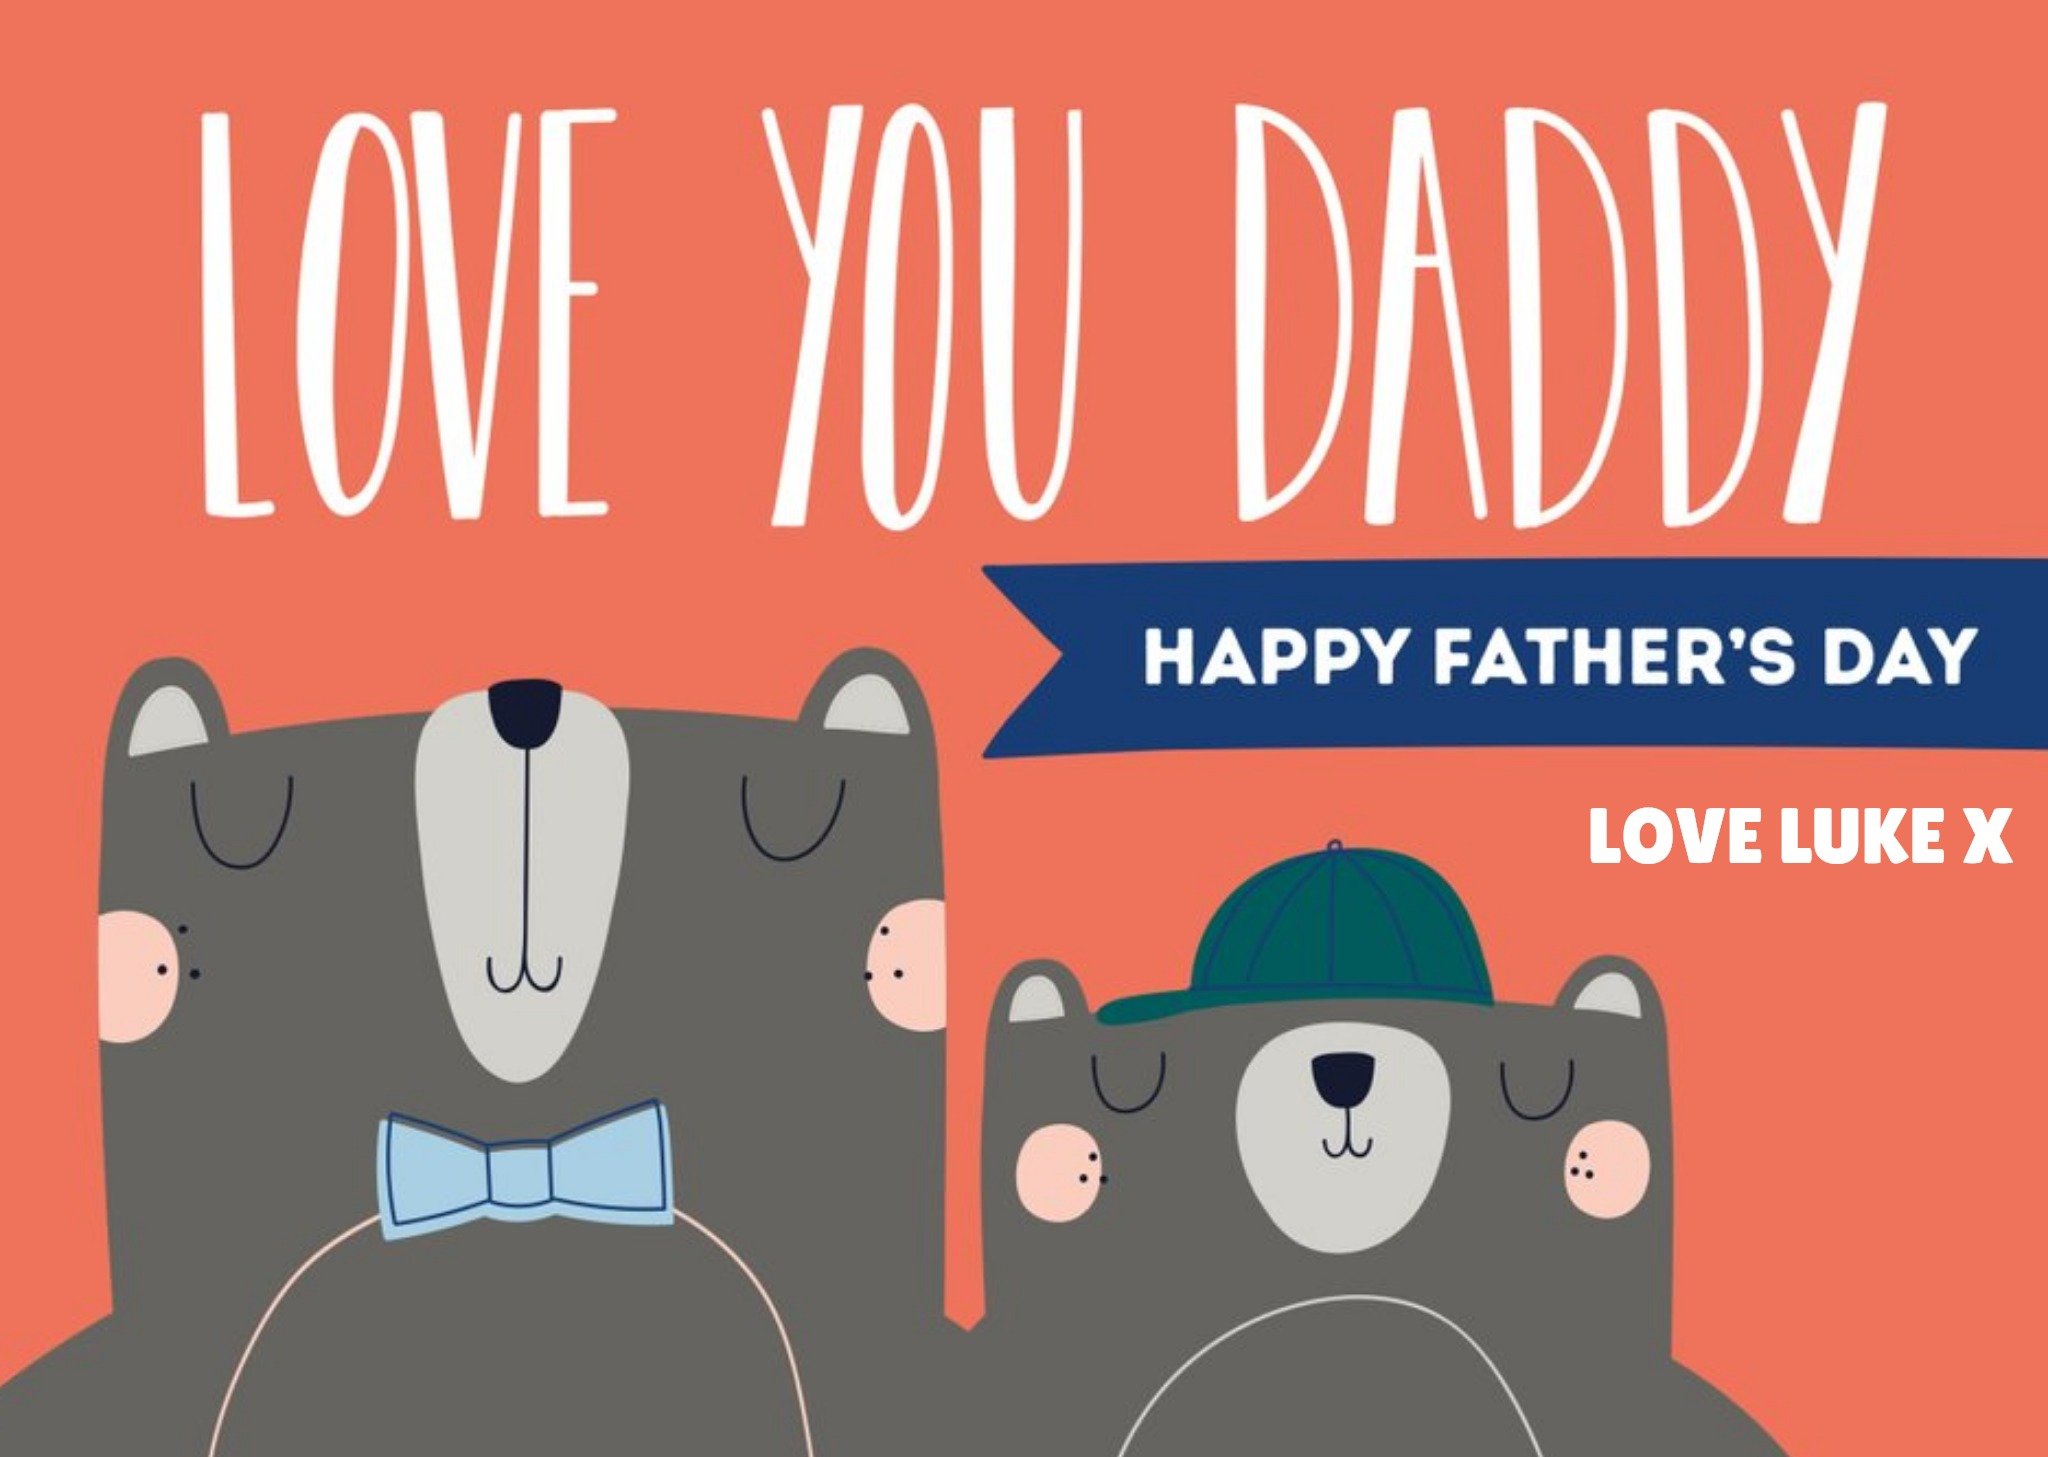 Moonpig Cute Bears Love You Daddy Happy Father's Day Card, Large